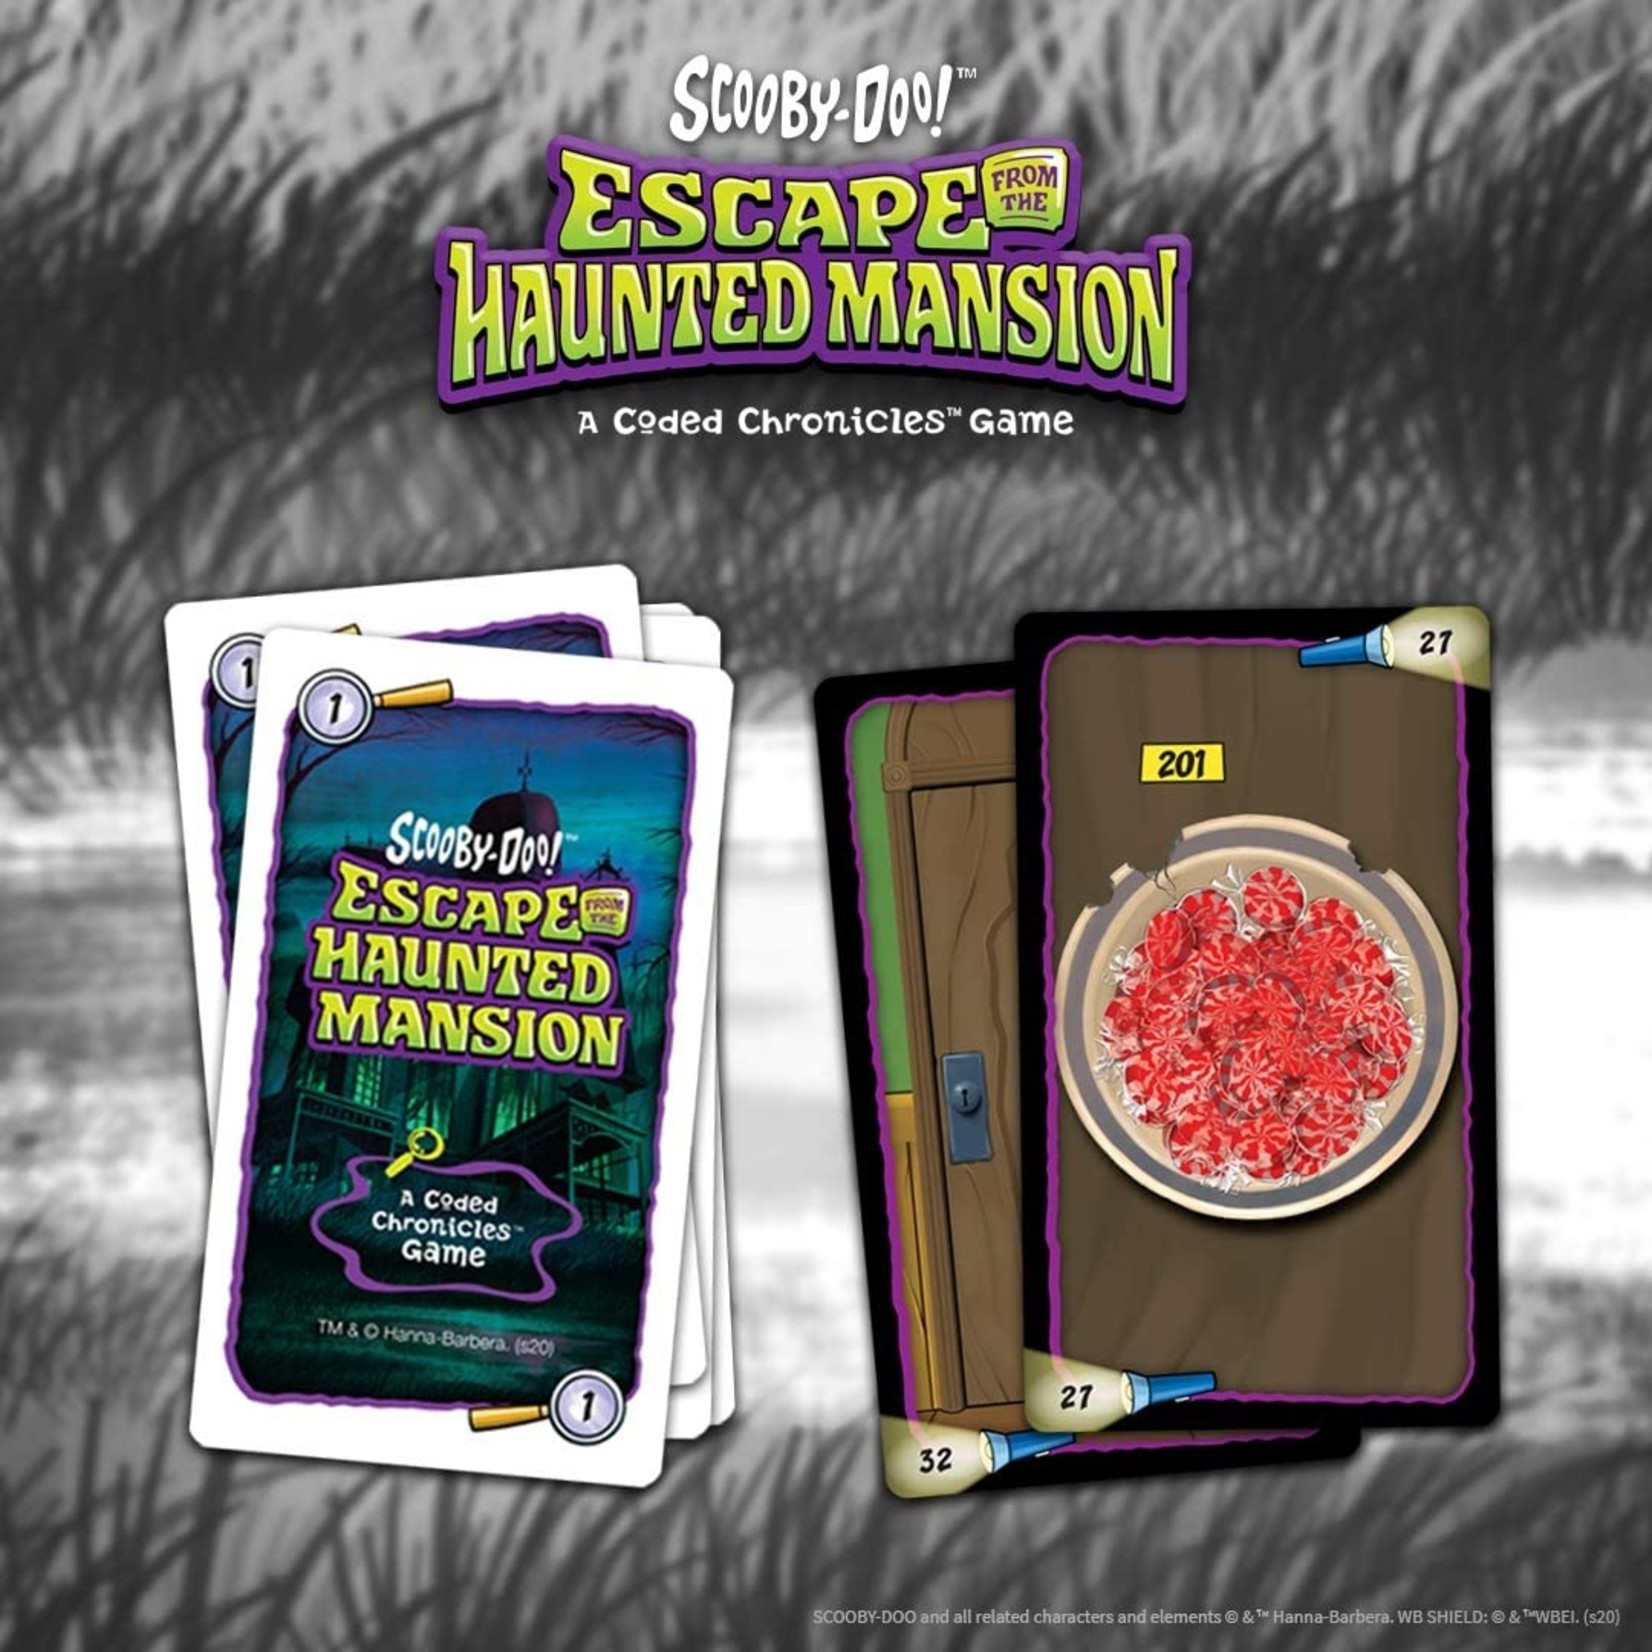 USAopoly Coded Chronicles Scooby Doo Escape from the Haunted Mansion